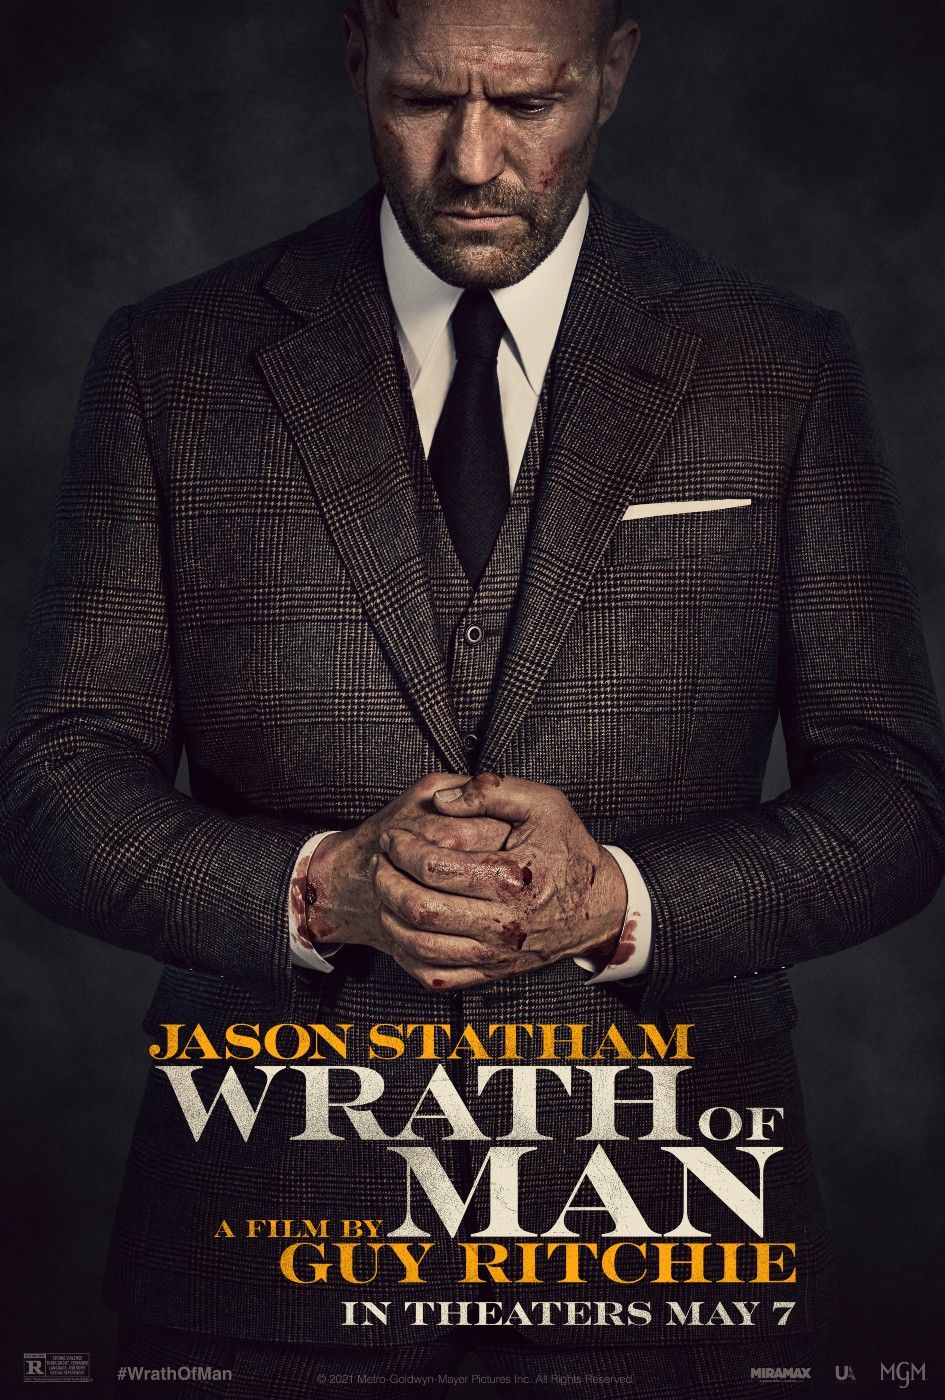 Jason Statham in Guy Ritchie Man of Wrath poster